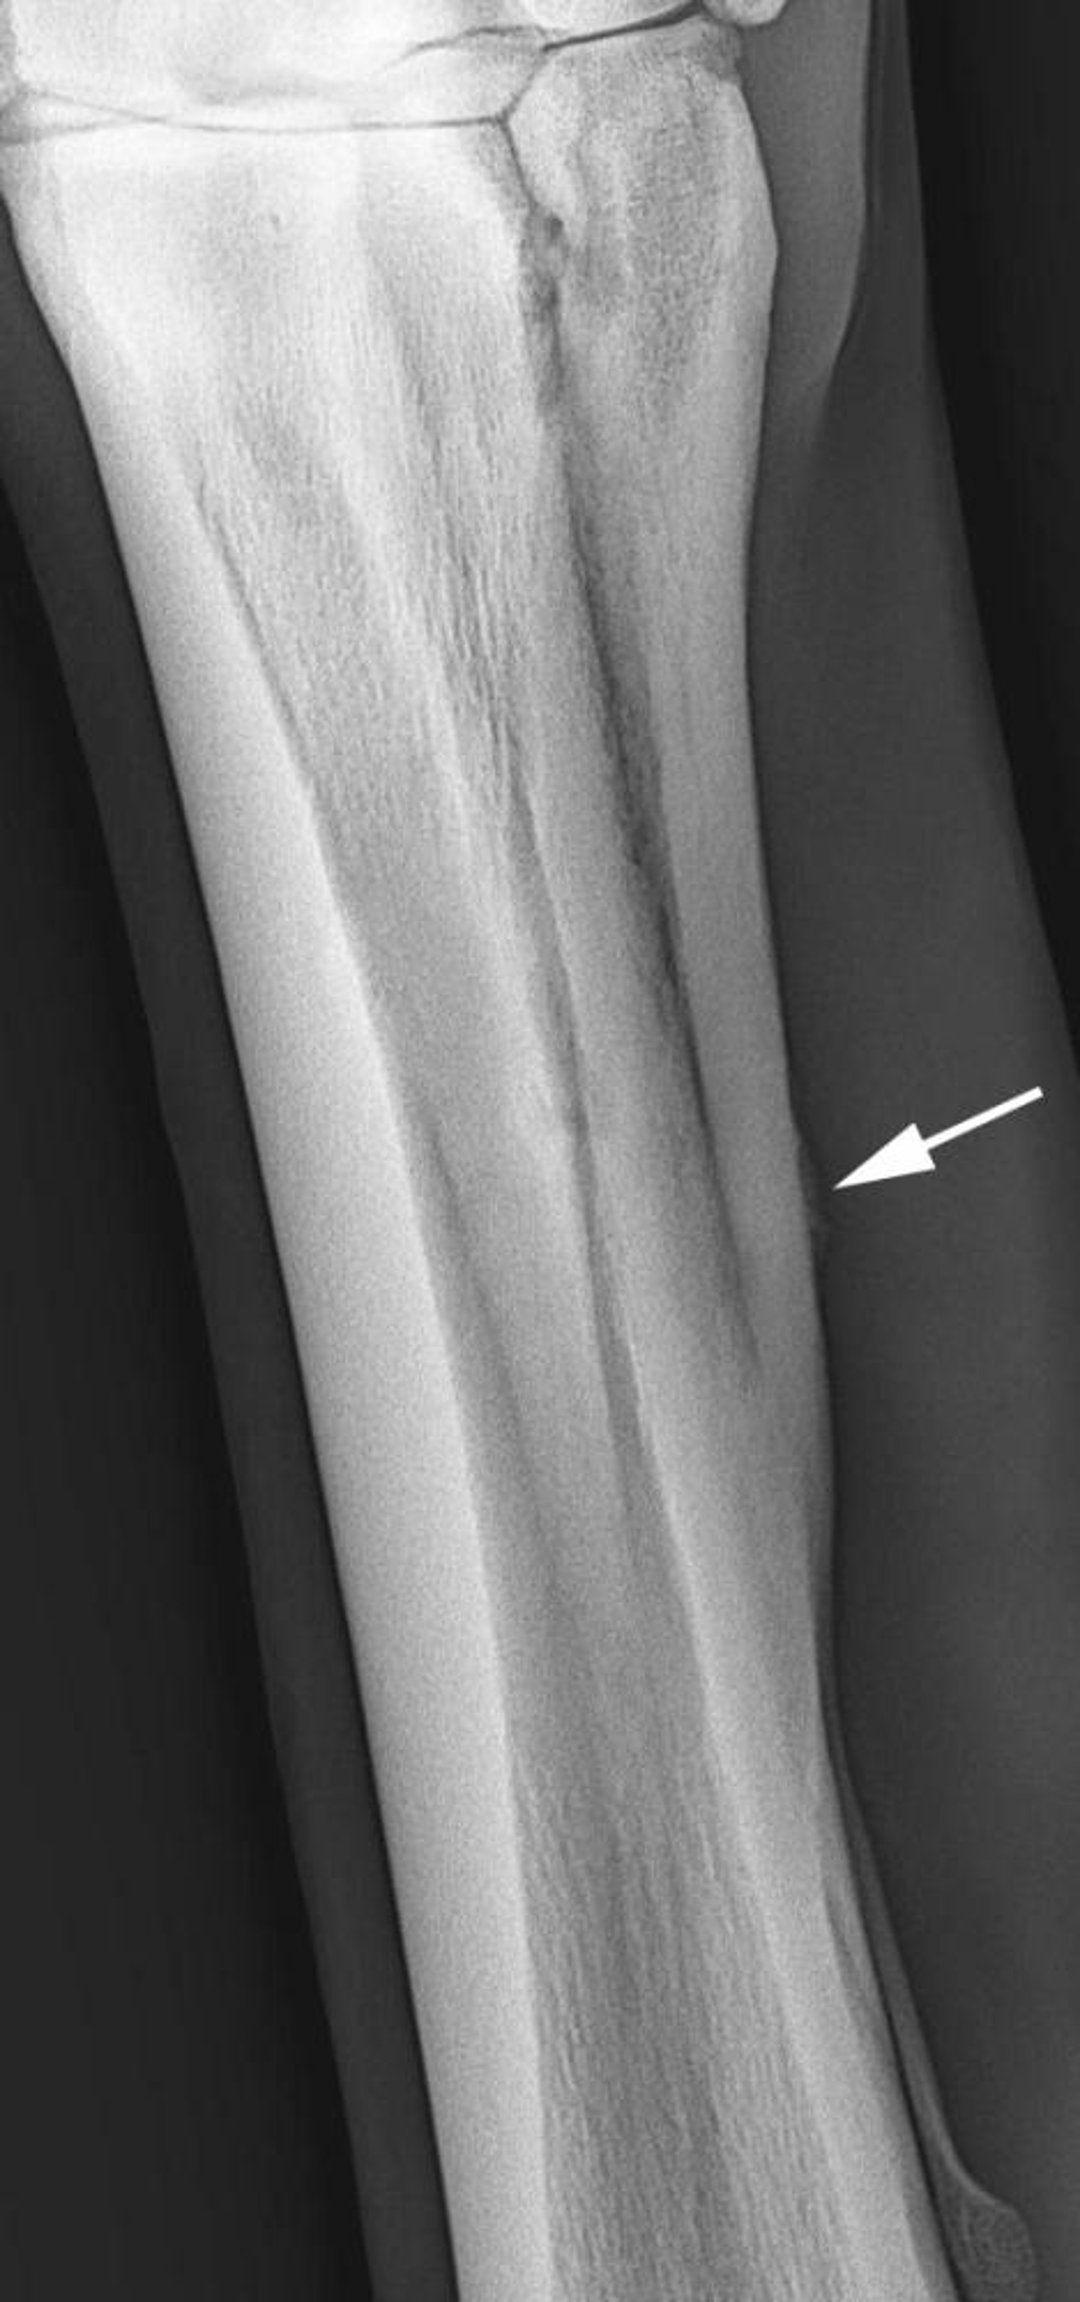 Periosteal new bone on second metacarpal, radiograph, horse